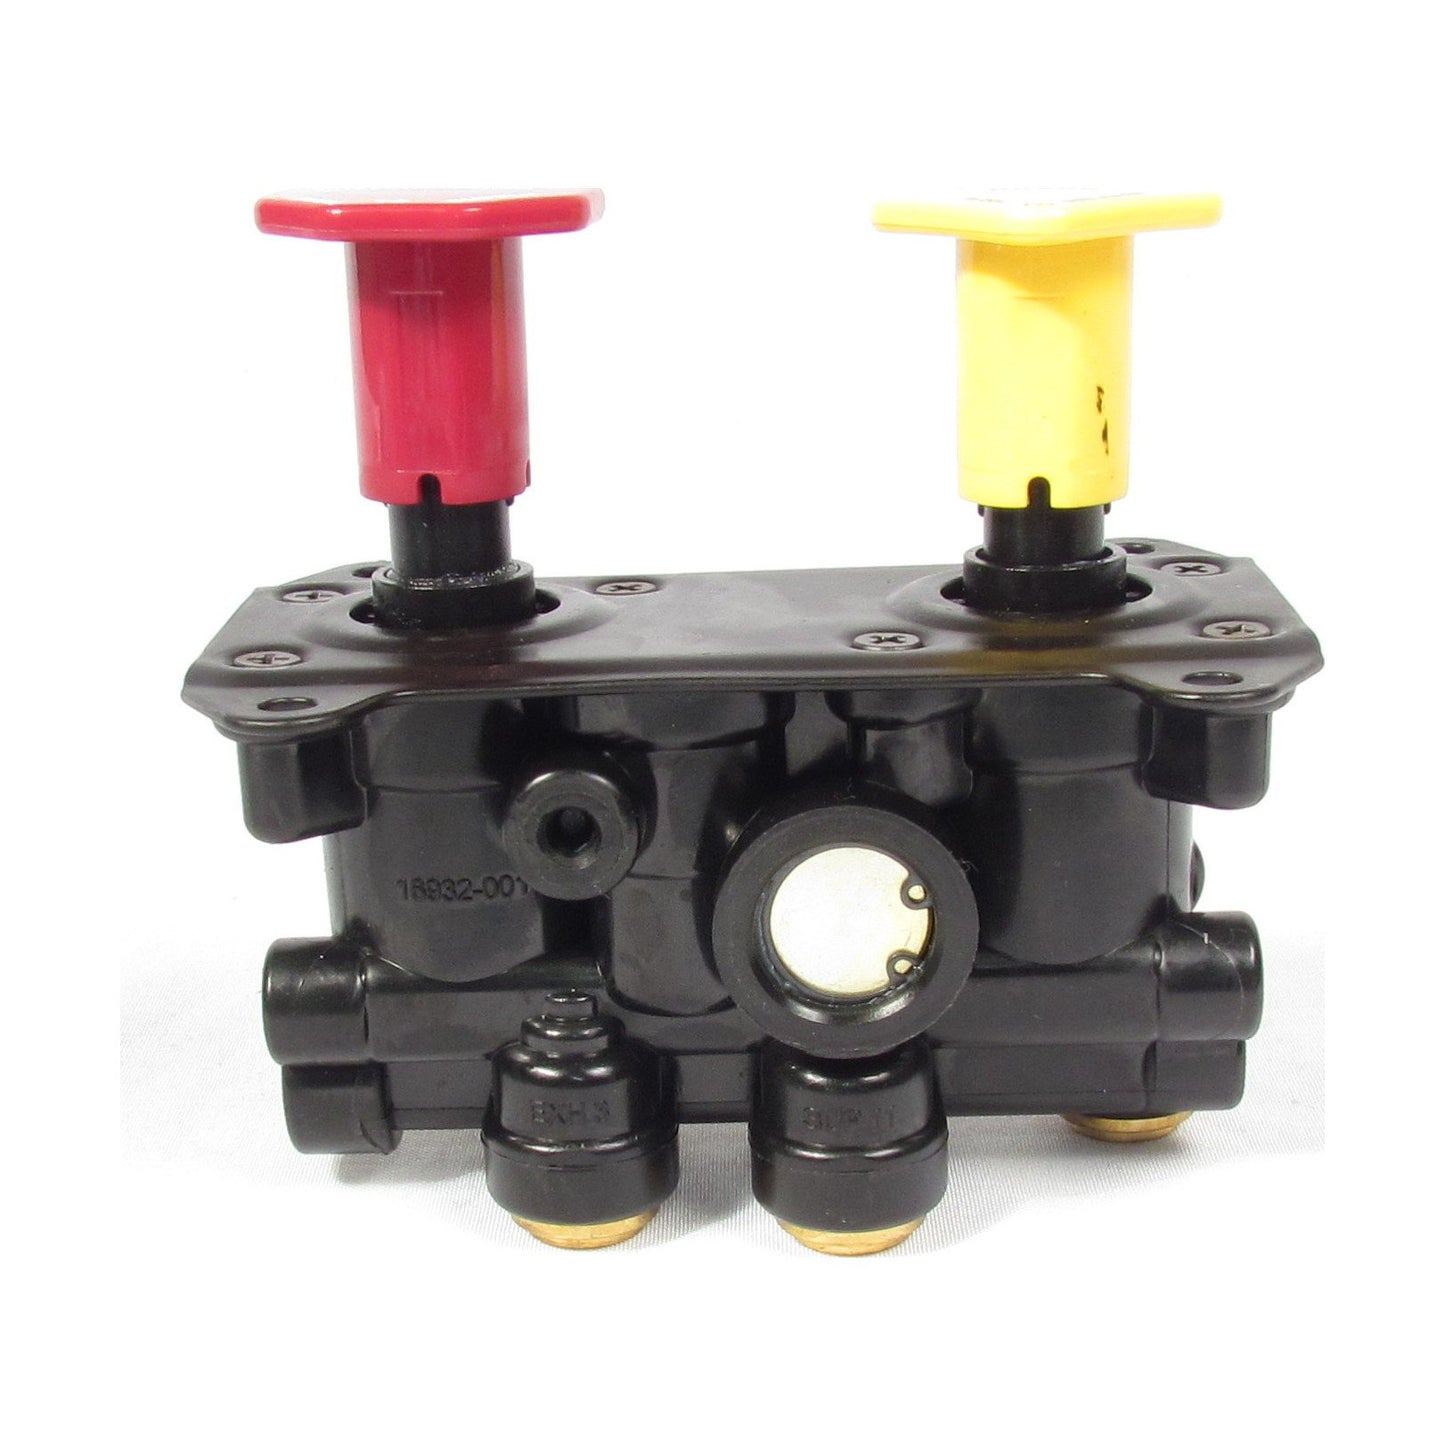 Fortpro MV-3 Dash Valve With 3/8" Push-To-Connect Ports Replacement for Bendix 800257 | F224611